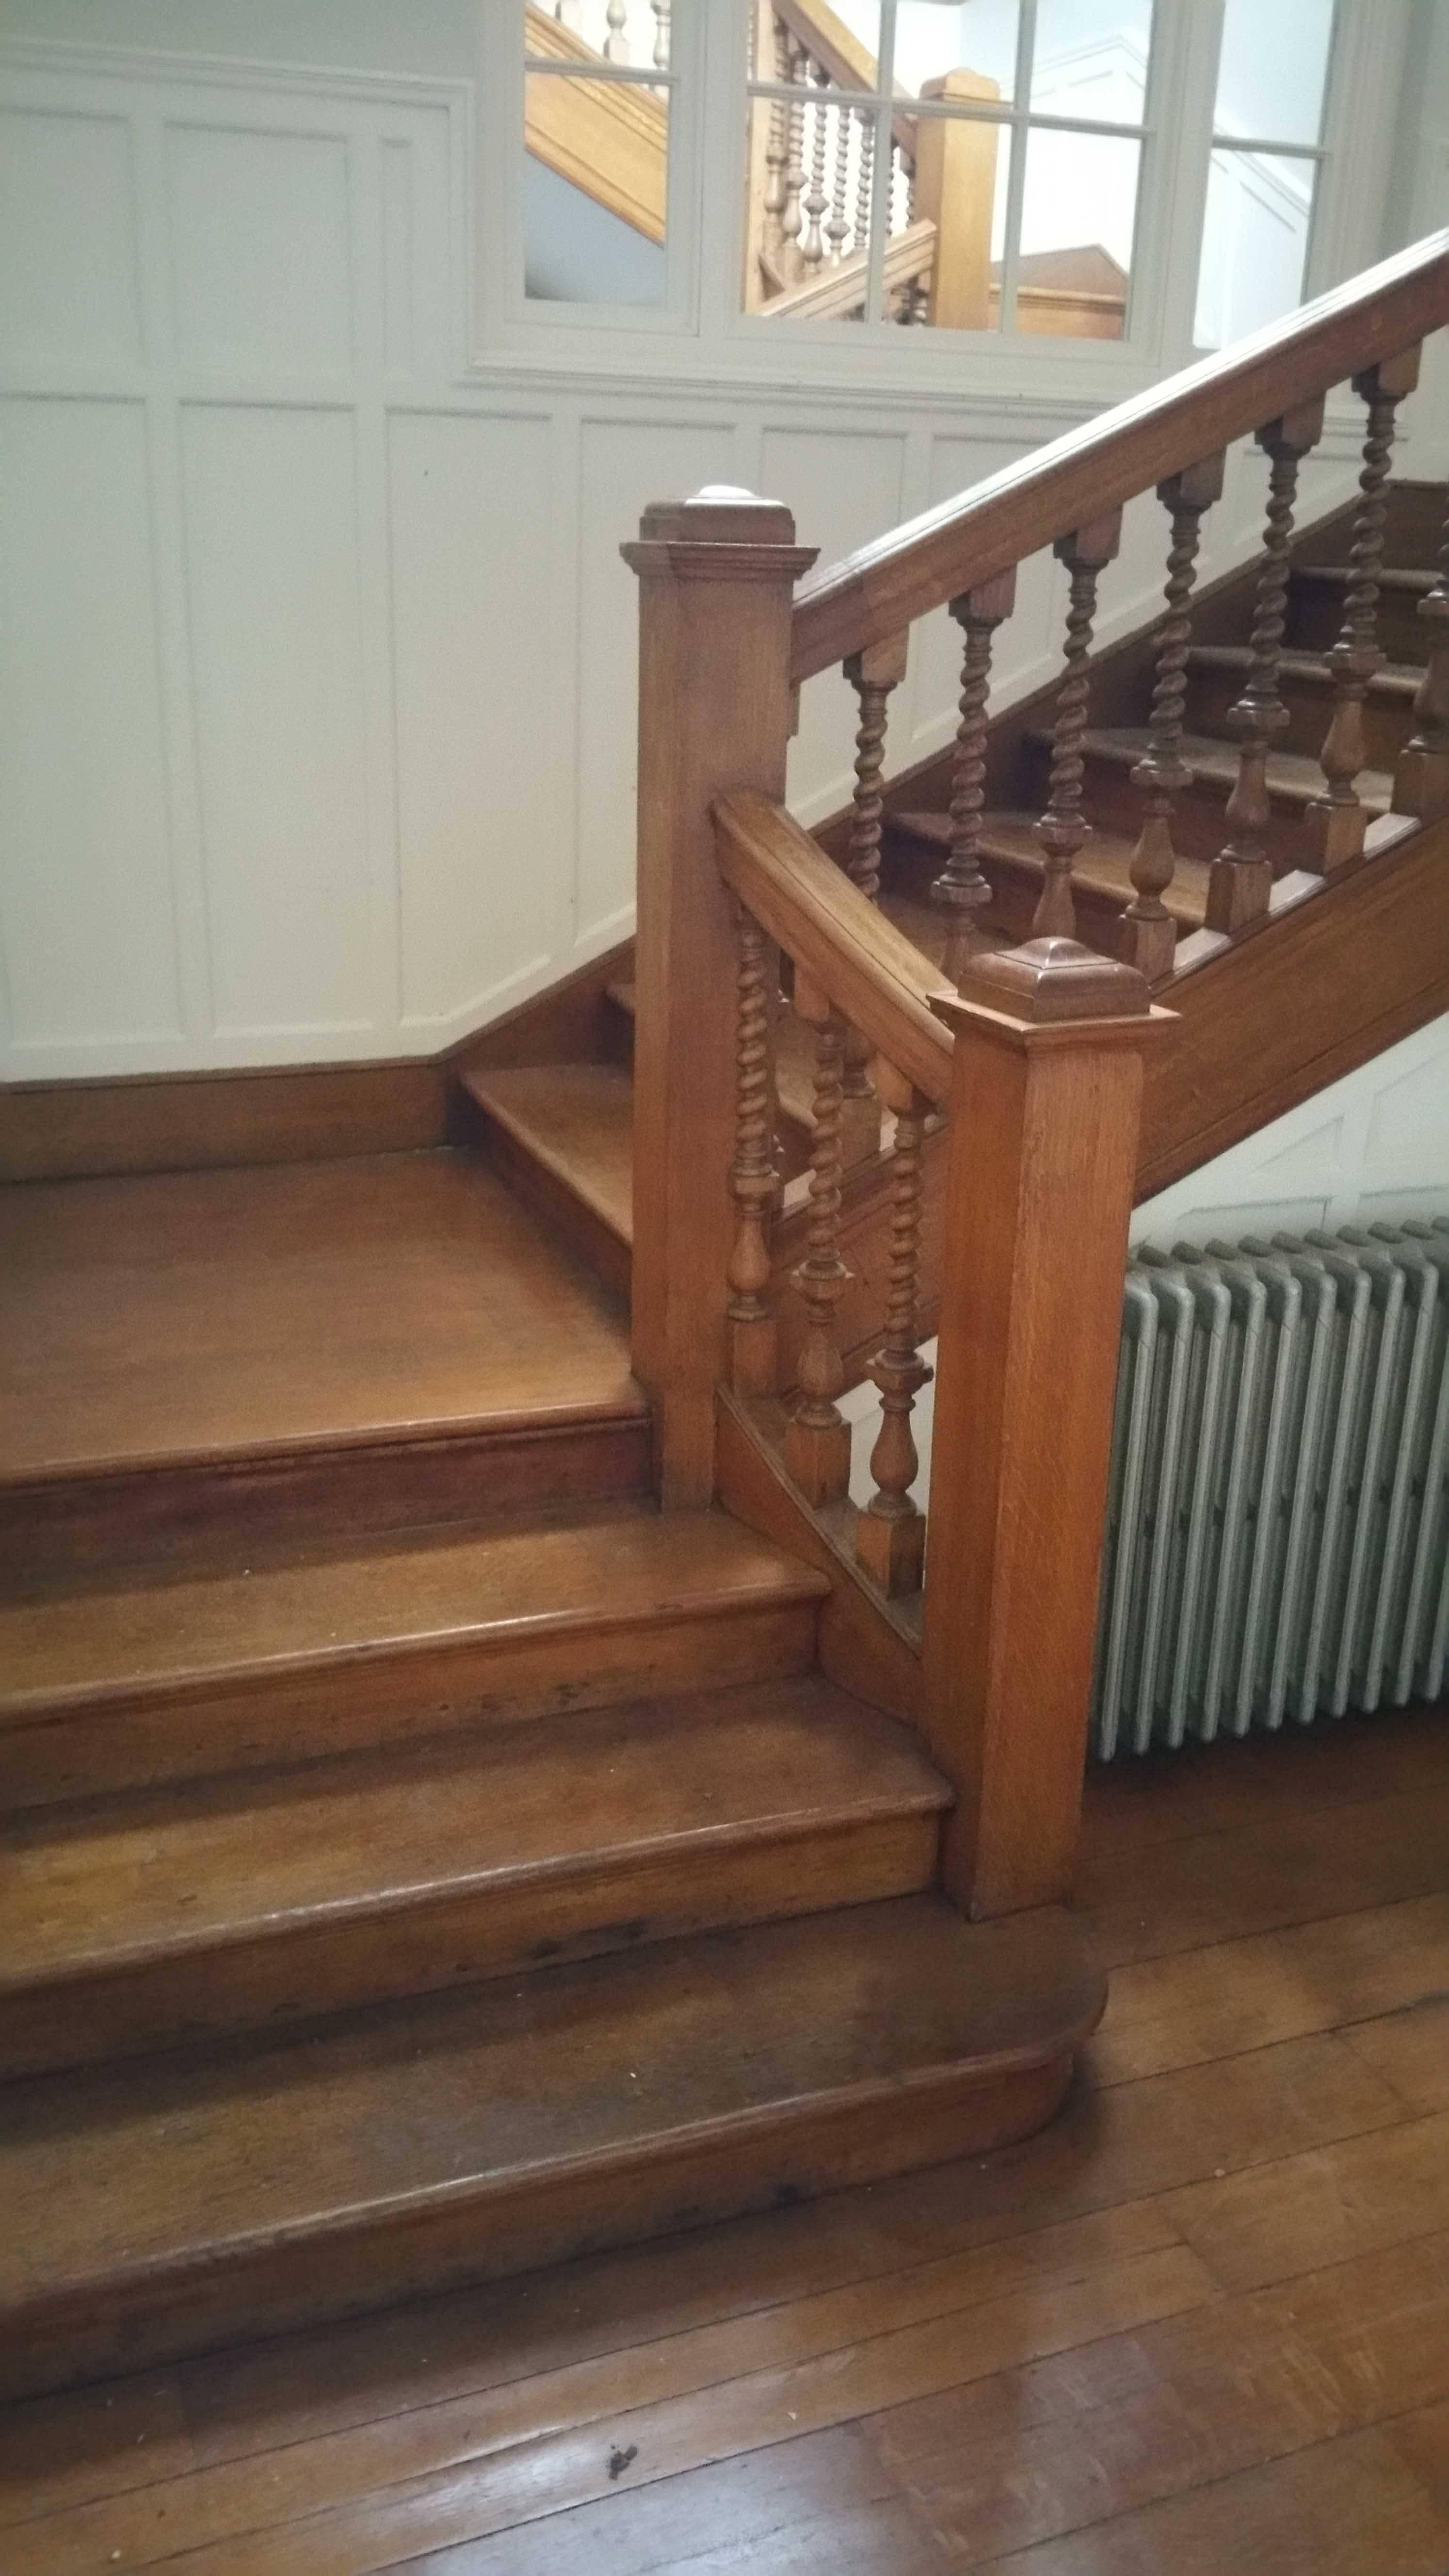 Removed from a large country house. This was the primary stairwell leading from the ground floor to the 1st floor. Spindles and handrail available only.